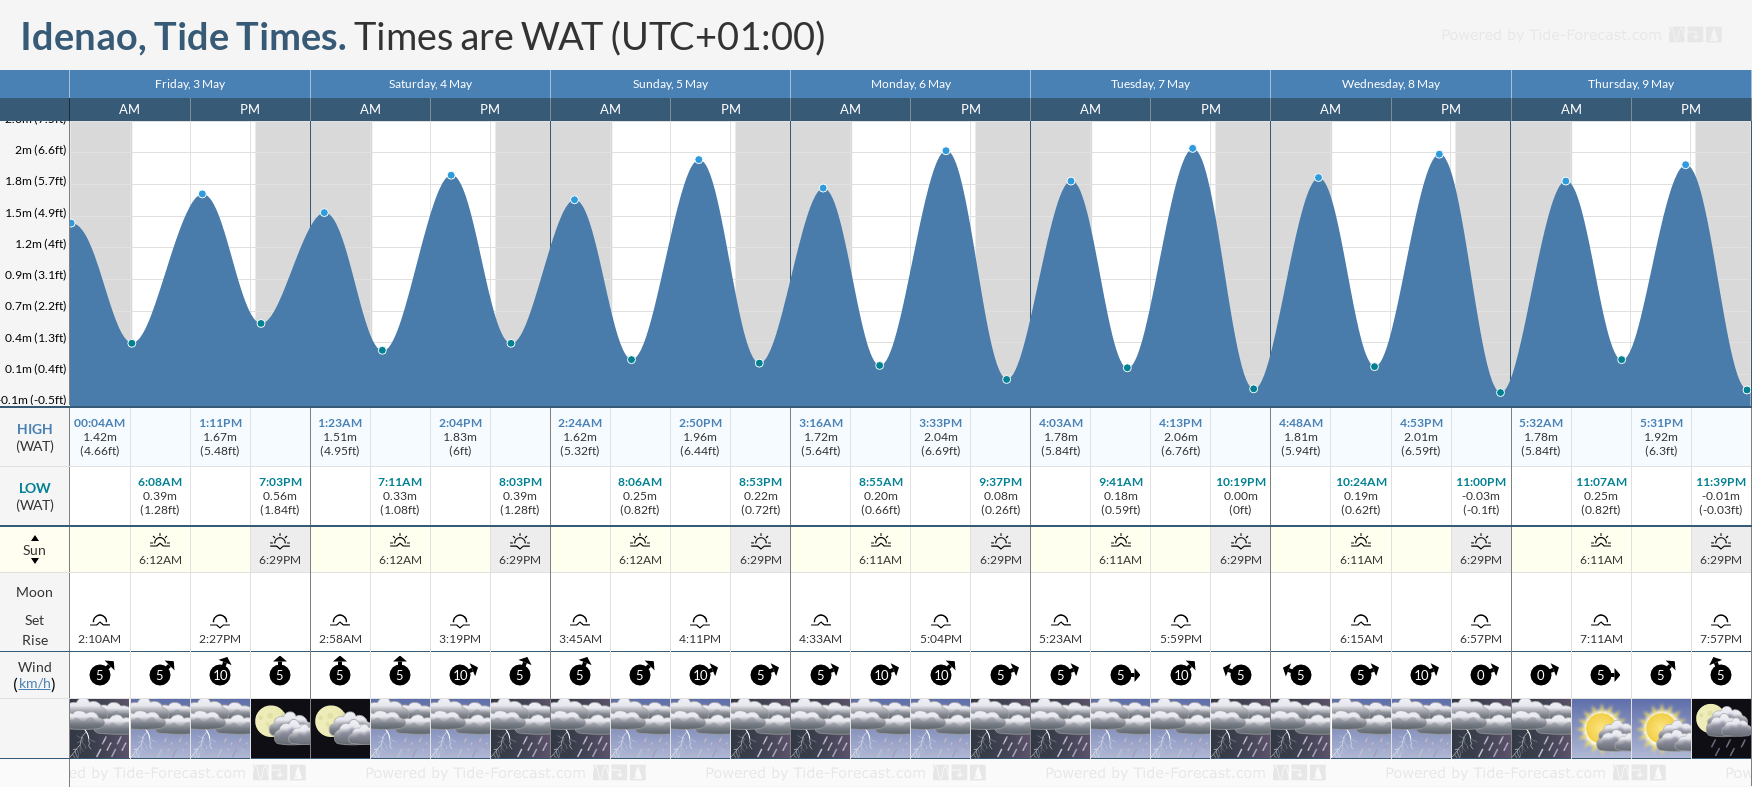 Idenao Tide Chart including high and low tide times for the next 7 days